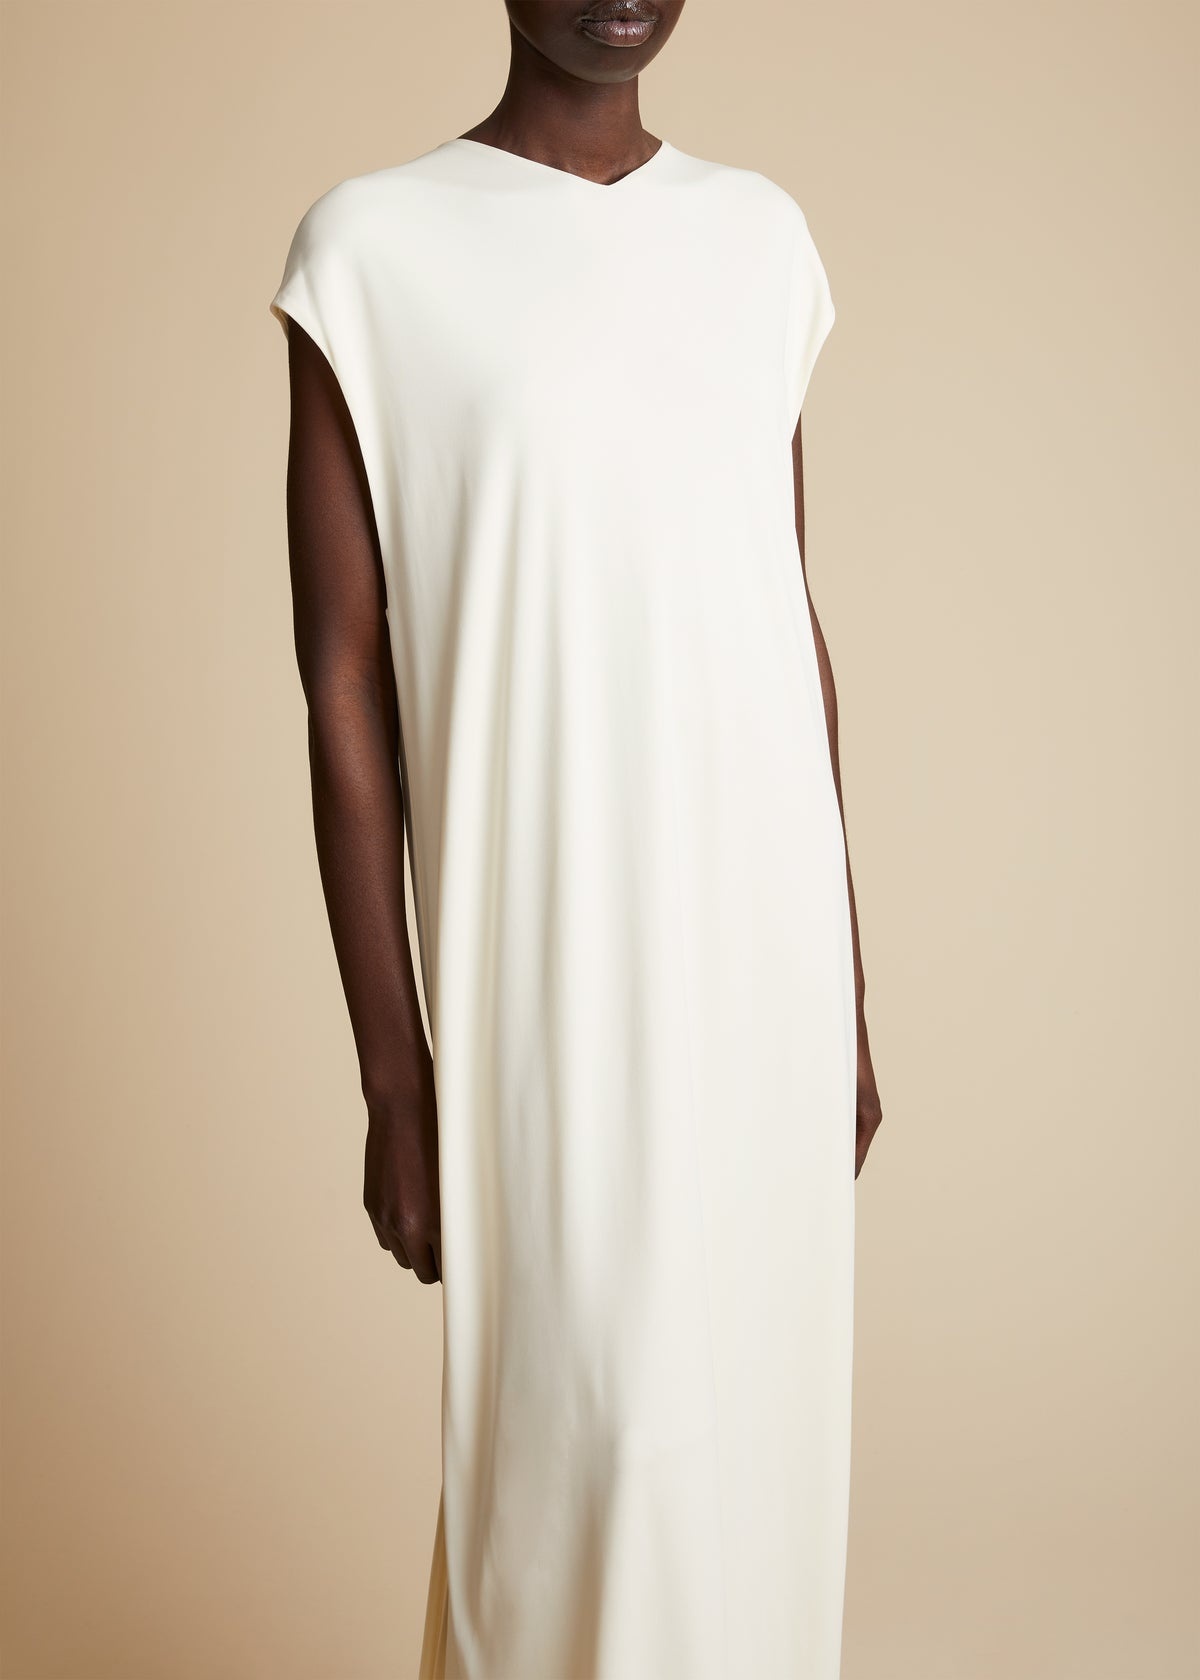 The Taylor Dress in Cream - 4